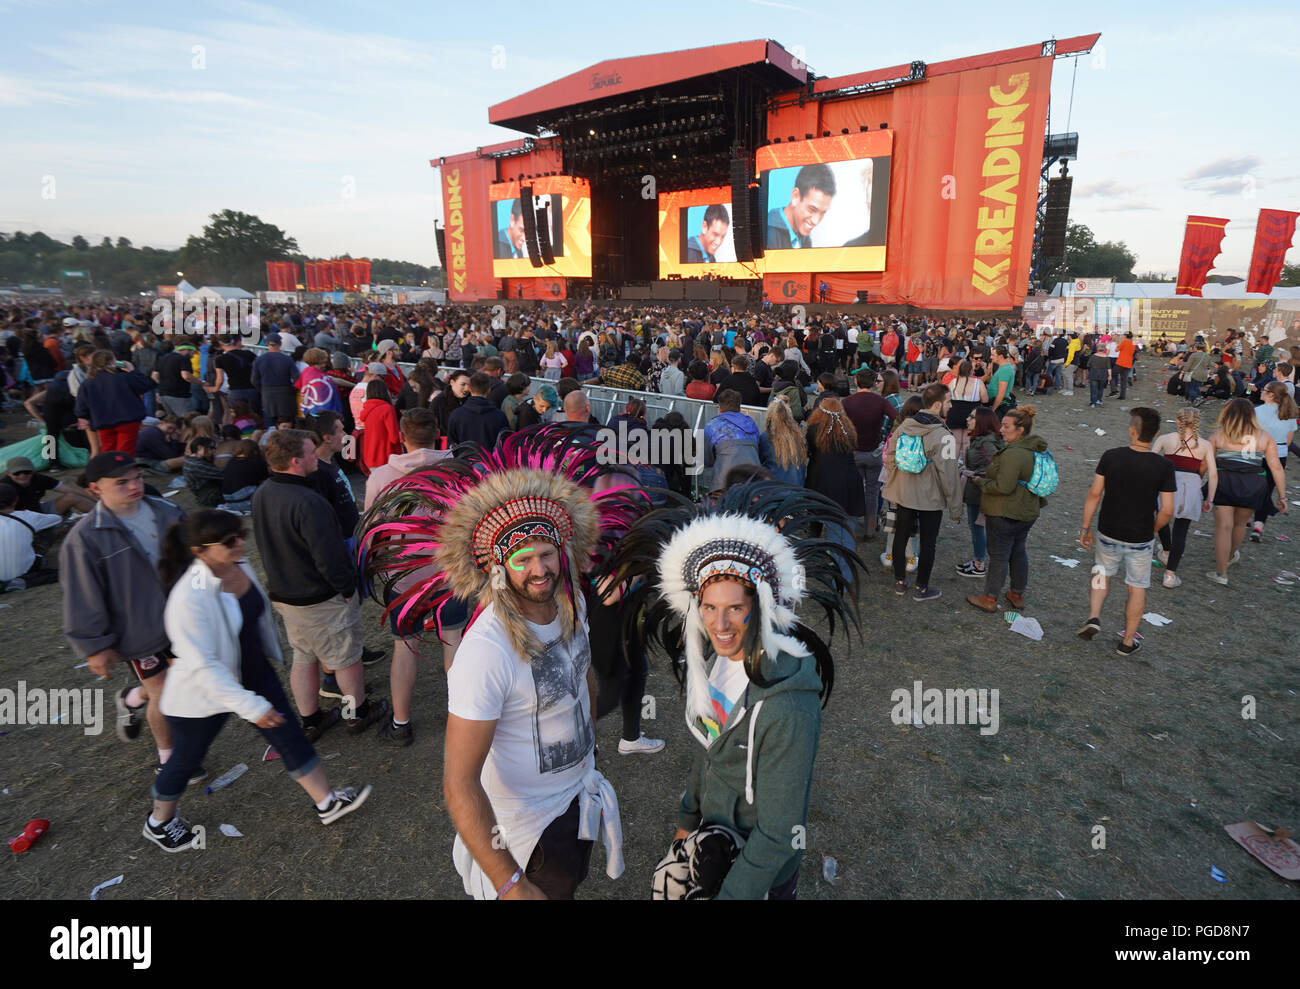 Reading, UK. 25th Aug, 2018. A view of the Main Stage at the 2018 Reading  Festival. Photo date: Saturday, August 25, 2018. Photo: Roger  Garfield/Alamy Credit: Roger Garfield/Alamy Live News Stock Photo - Alamy